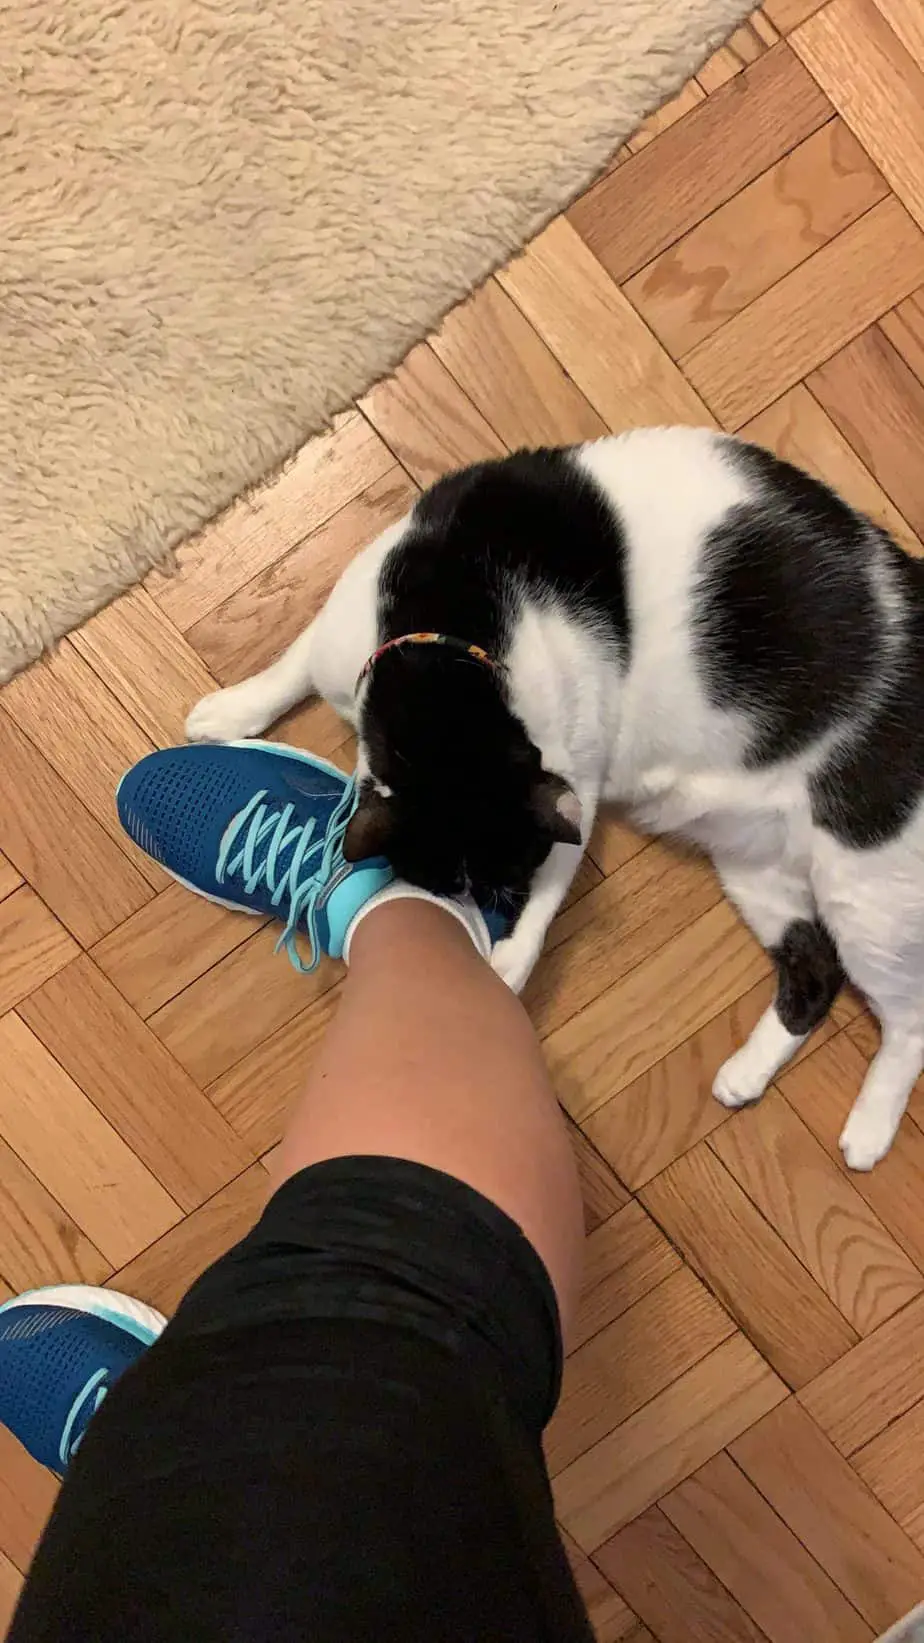 black and white cat by the foot of a girl